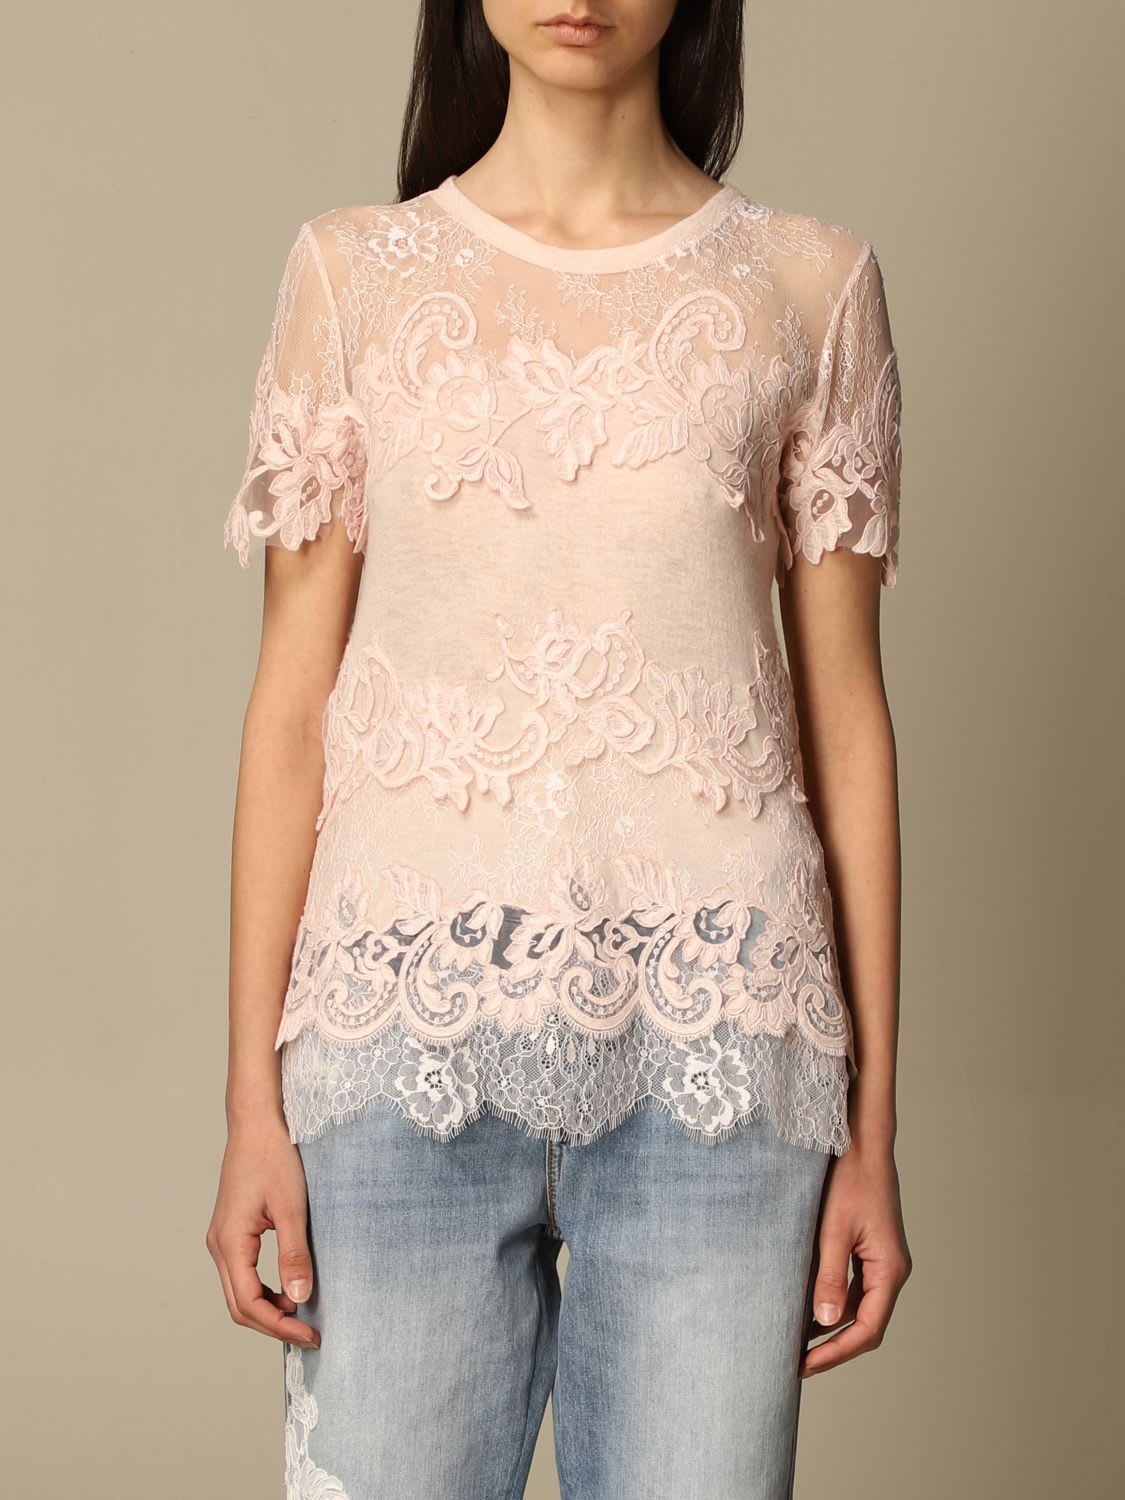 Ermanno Scervino Cotton Sweater With Floral Embroidery In Yellow Cream